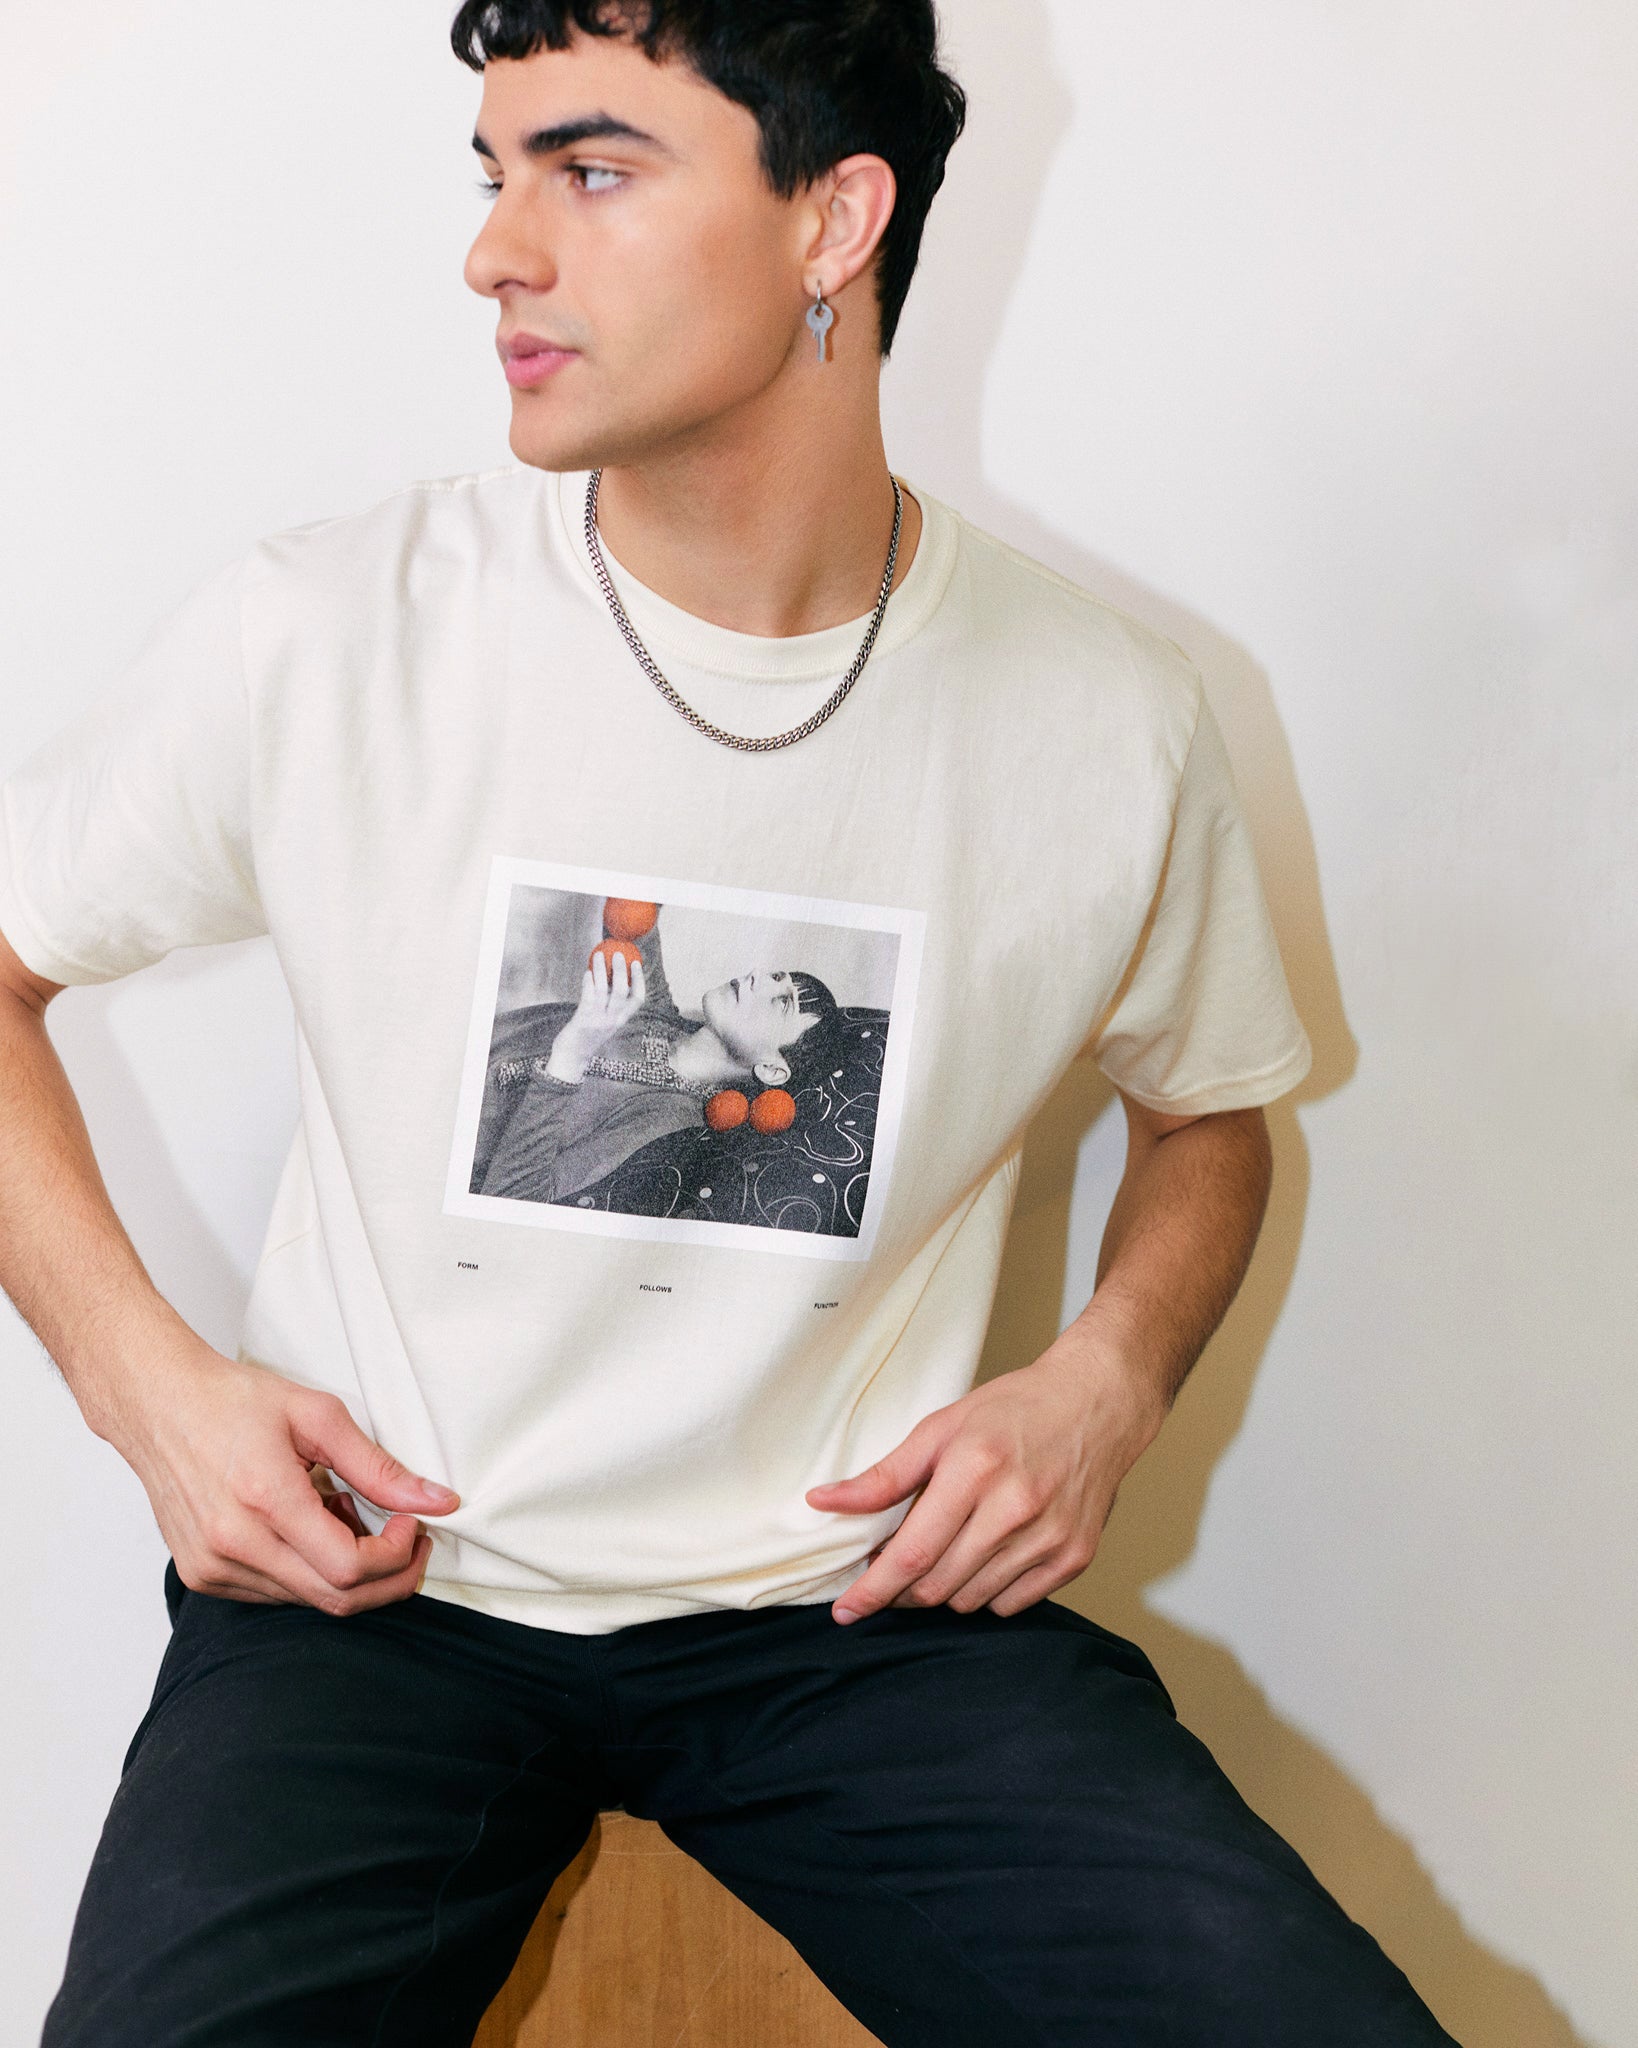 Arjang Mahdavi wears Cream/ Off White/ Ceramic Organic Short Sleeve 100% Cotton Tee with a print of Bauhaus Student Margaret Leiteritz and Form Follows Function Orange Graphic Text on the back from the Bauhaus Collection. 